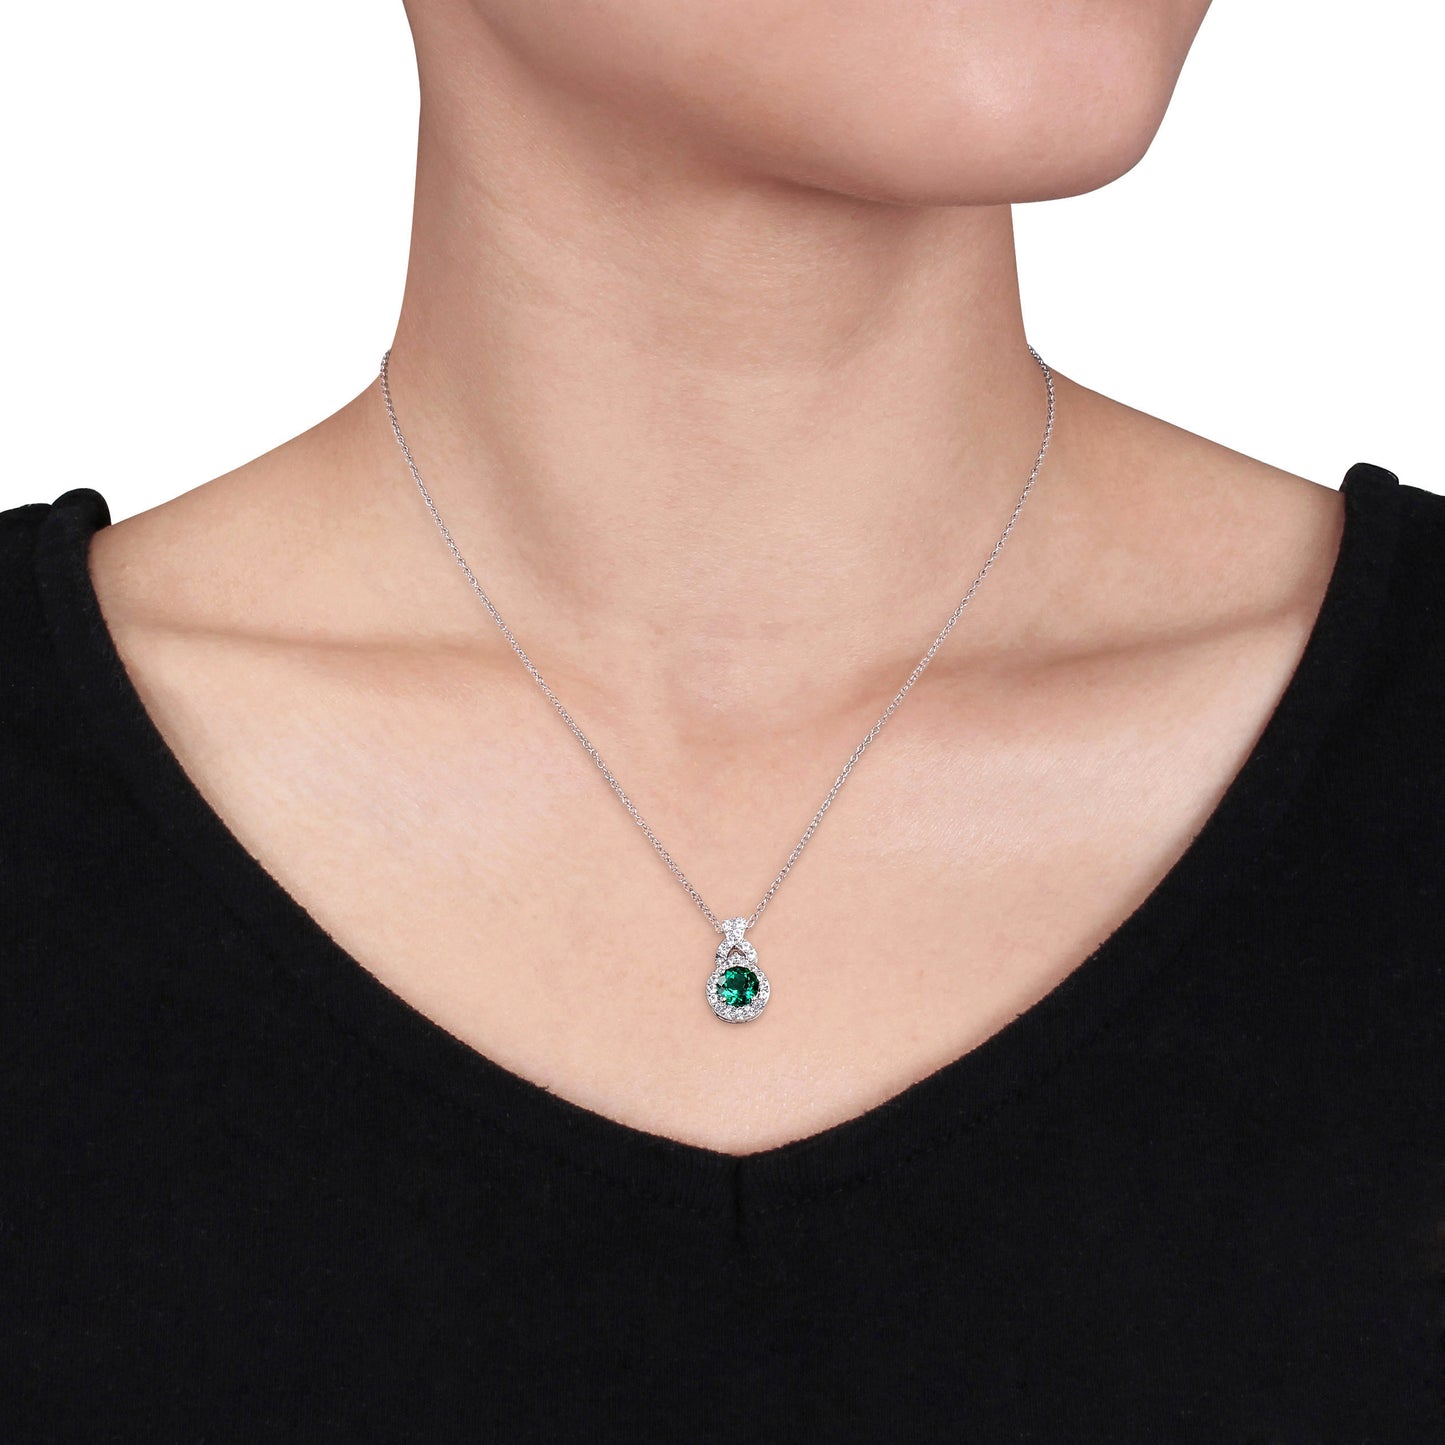 Emerald & White Sapphire Necklace in Sterling Silver